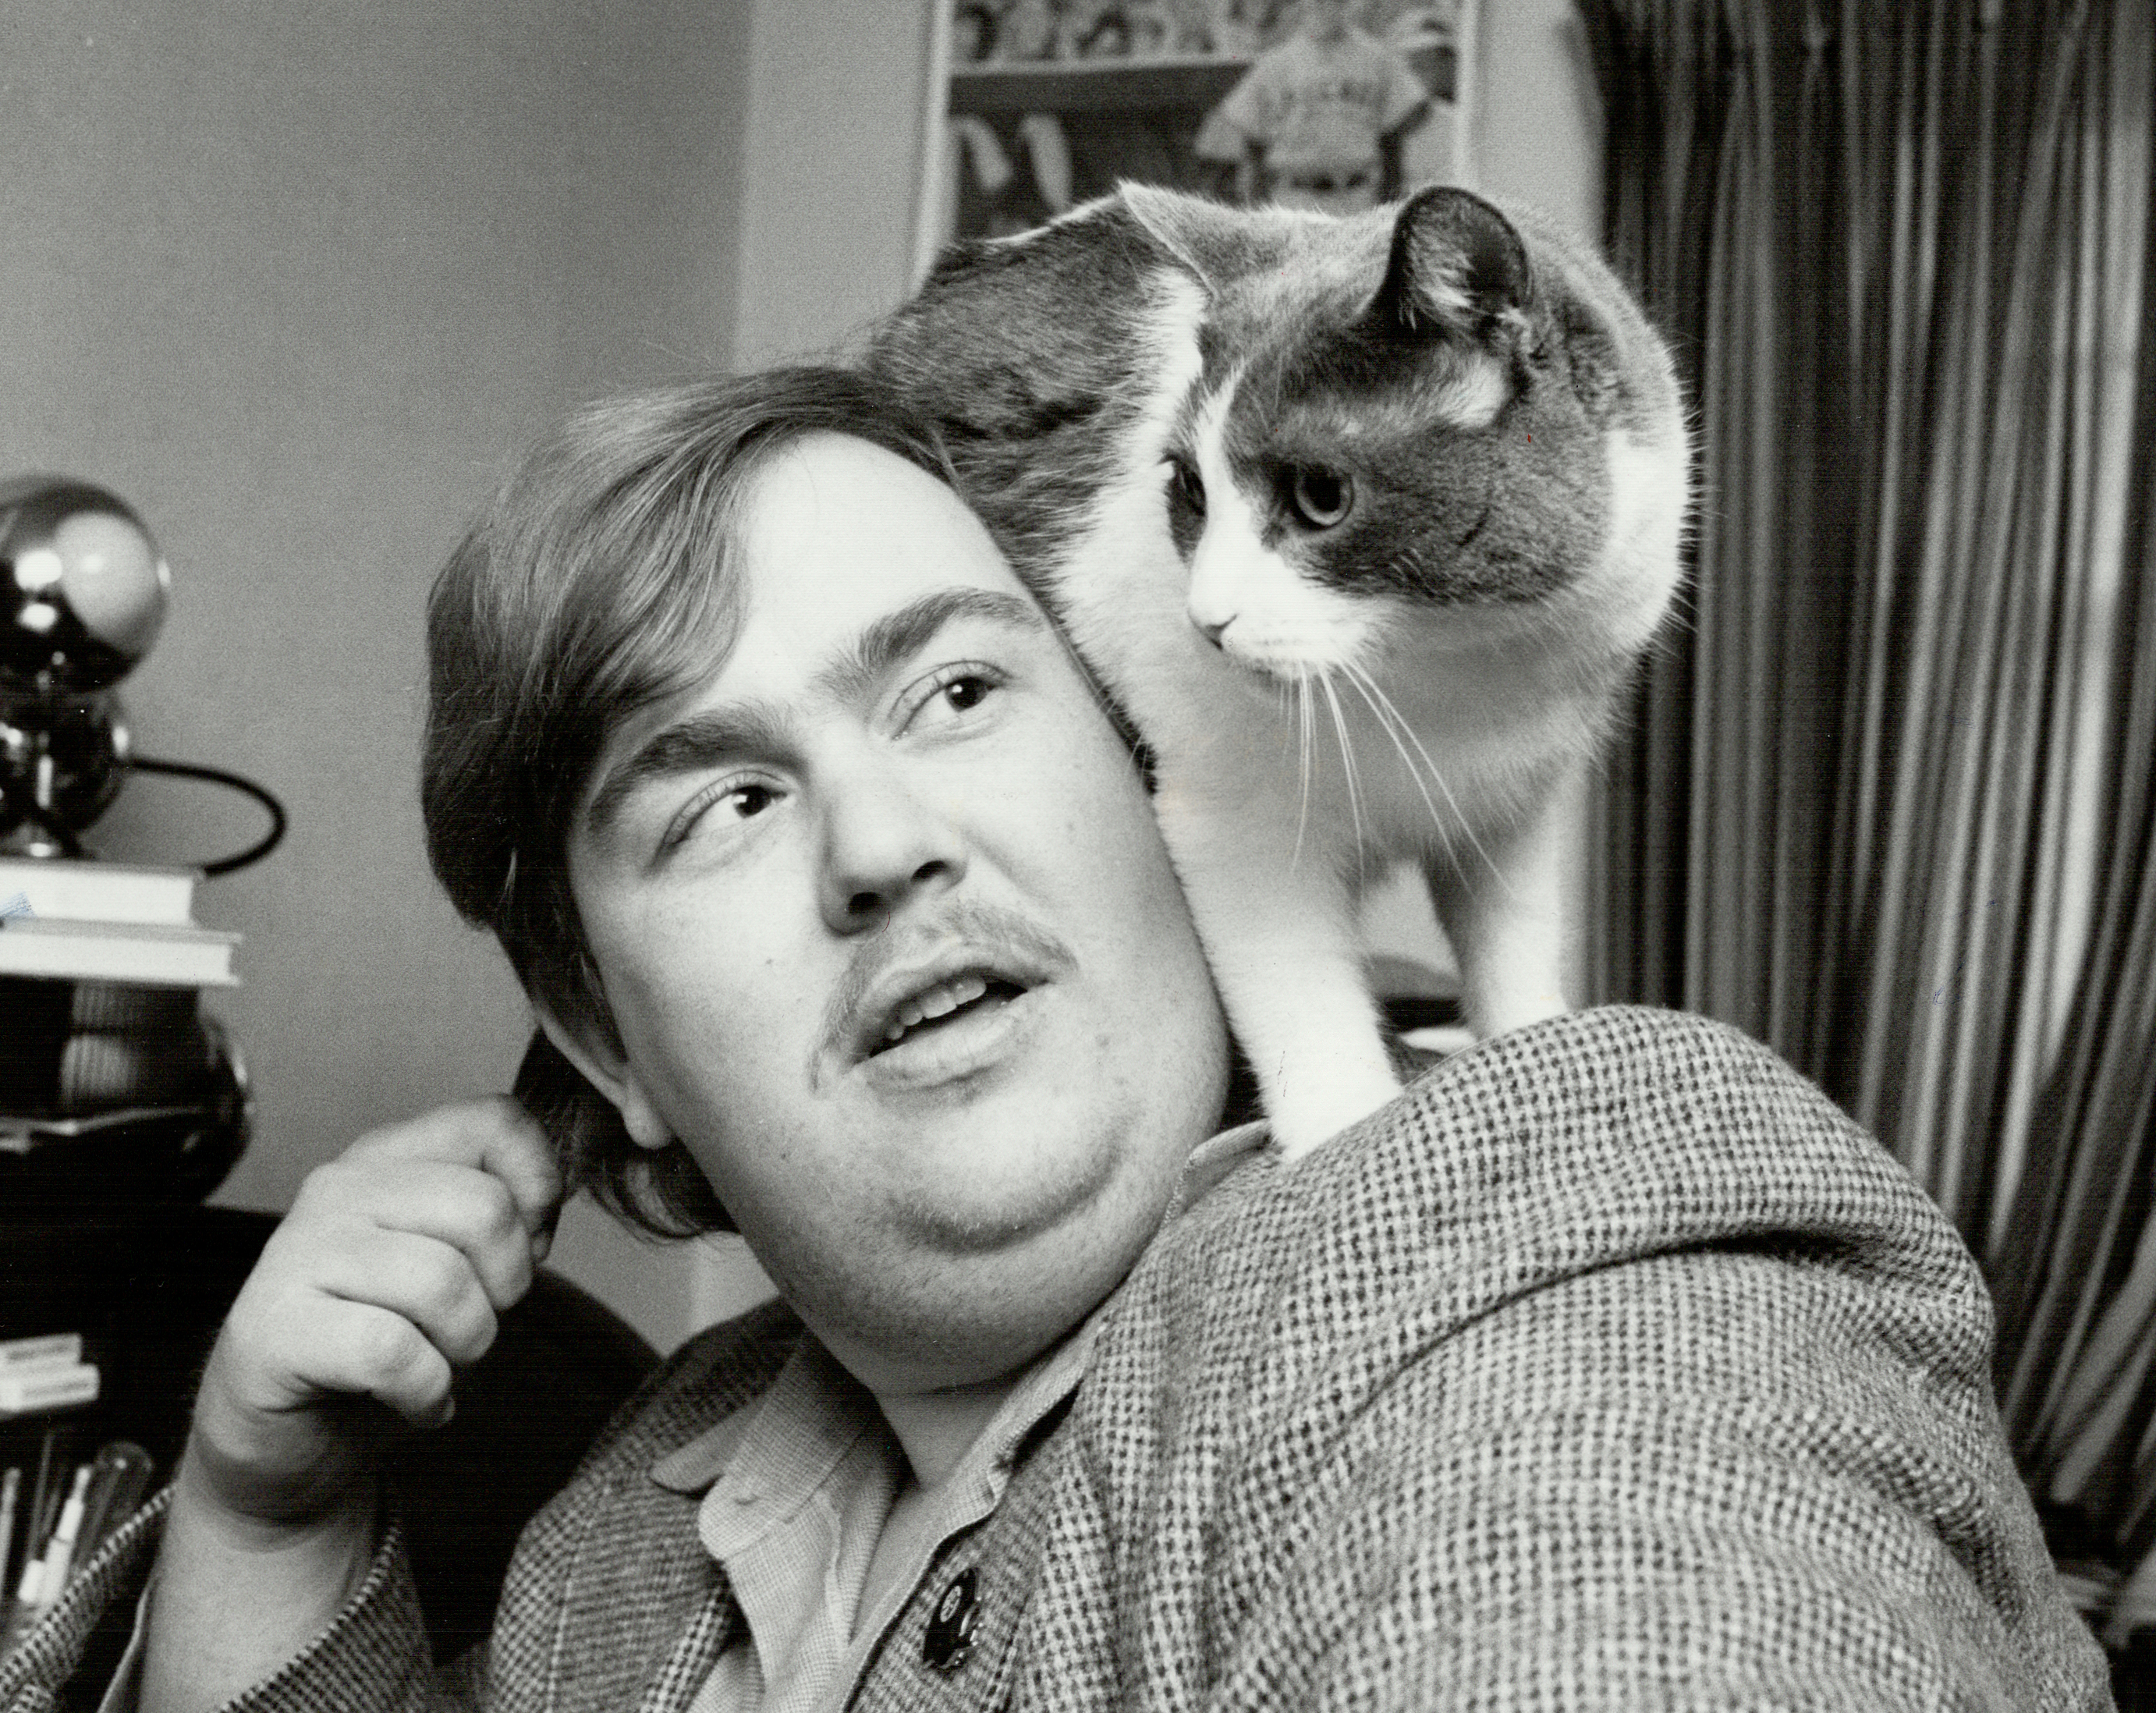 John Candy, vers 1980 | Source : Getty Images